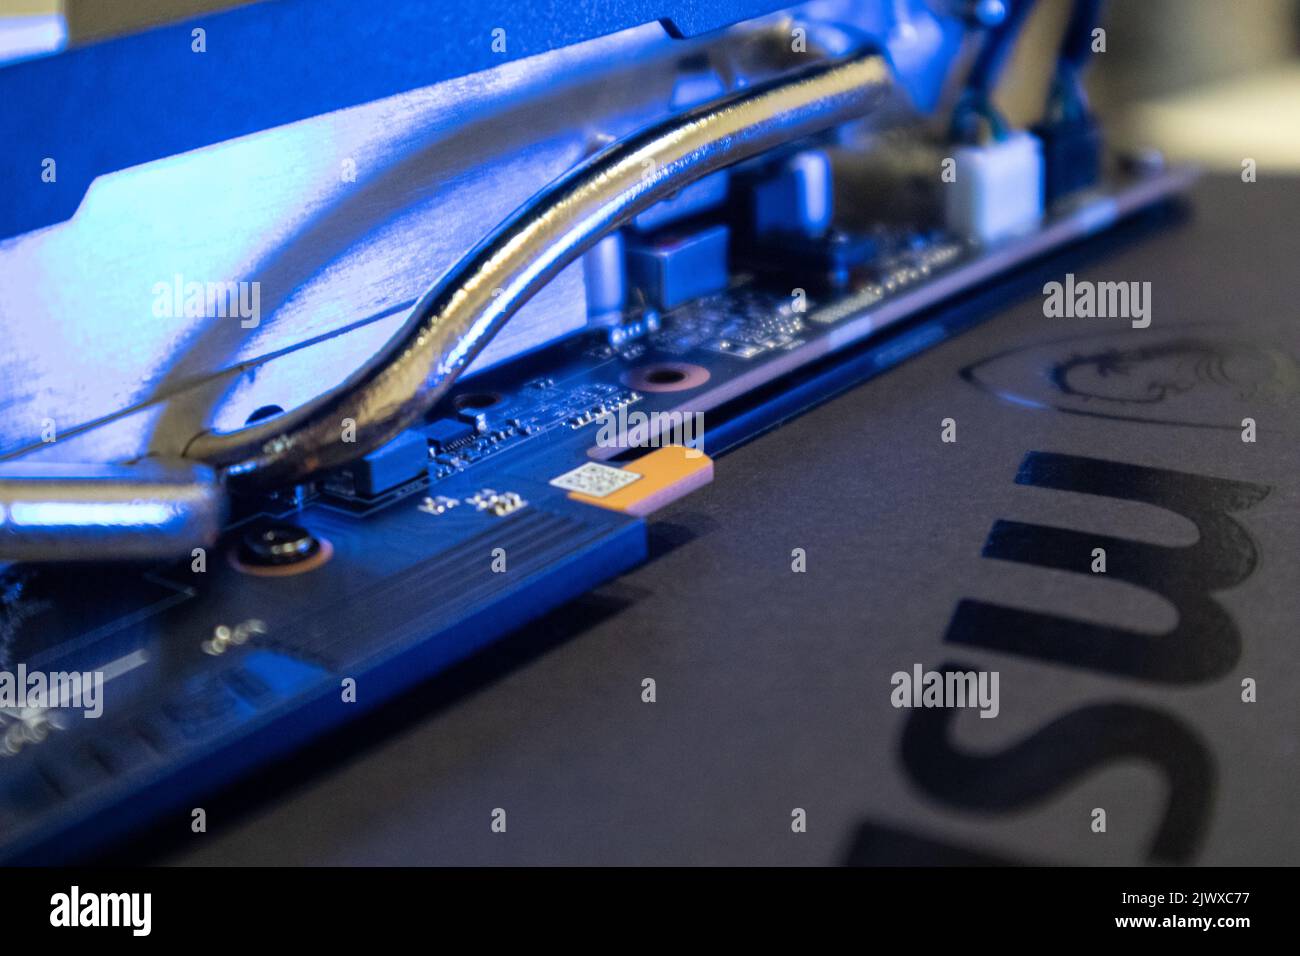 Kyiv, Ukraine - August 19, 2022: MSI logo and graphics card cooling system details in blue light, PC hardware close-up with selective focus Stock Photo